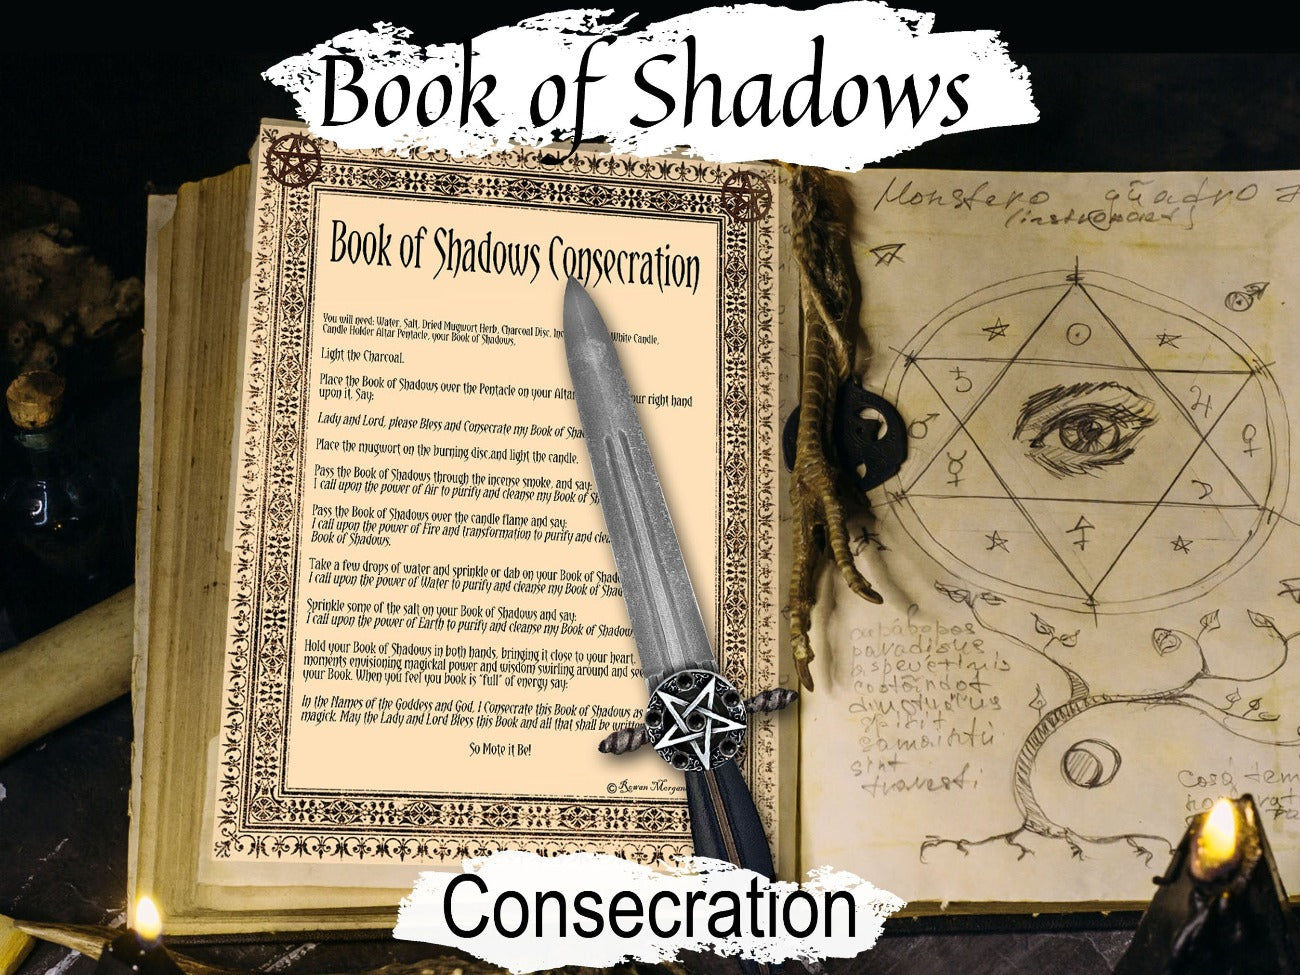 CONSECRATE GRIMOIRE, How to Bless and Empower Book of Shadows, Dedicate a Book of Shadows, Wicca Witchcraft Book Devotion, Sanctify a Book - Morgana Magick Spell